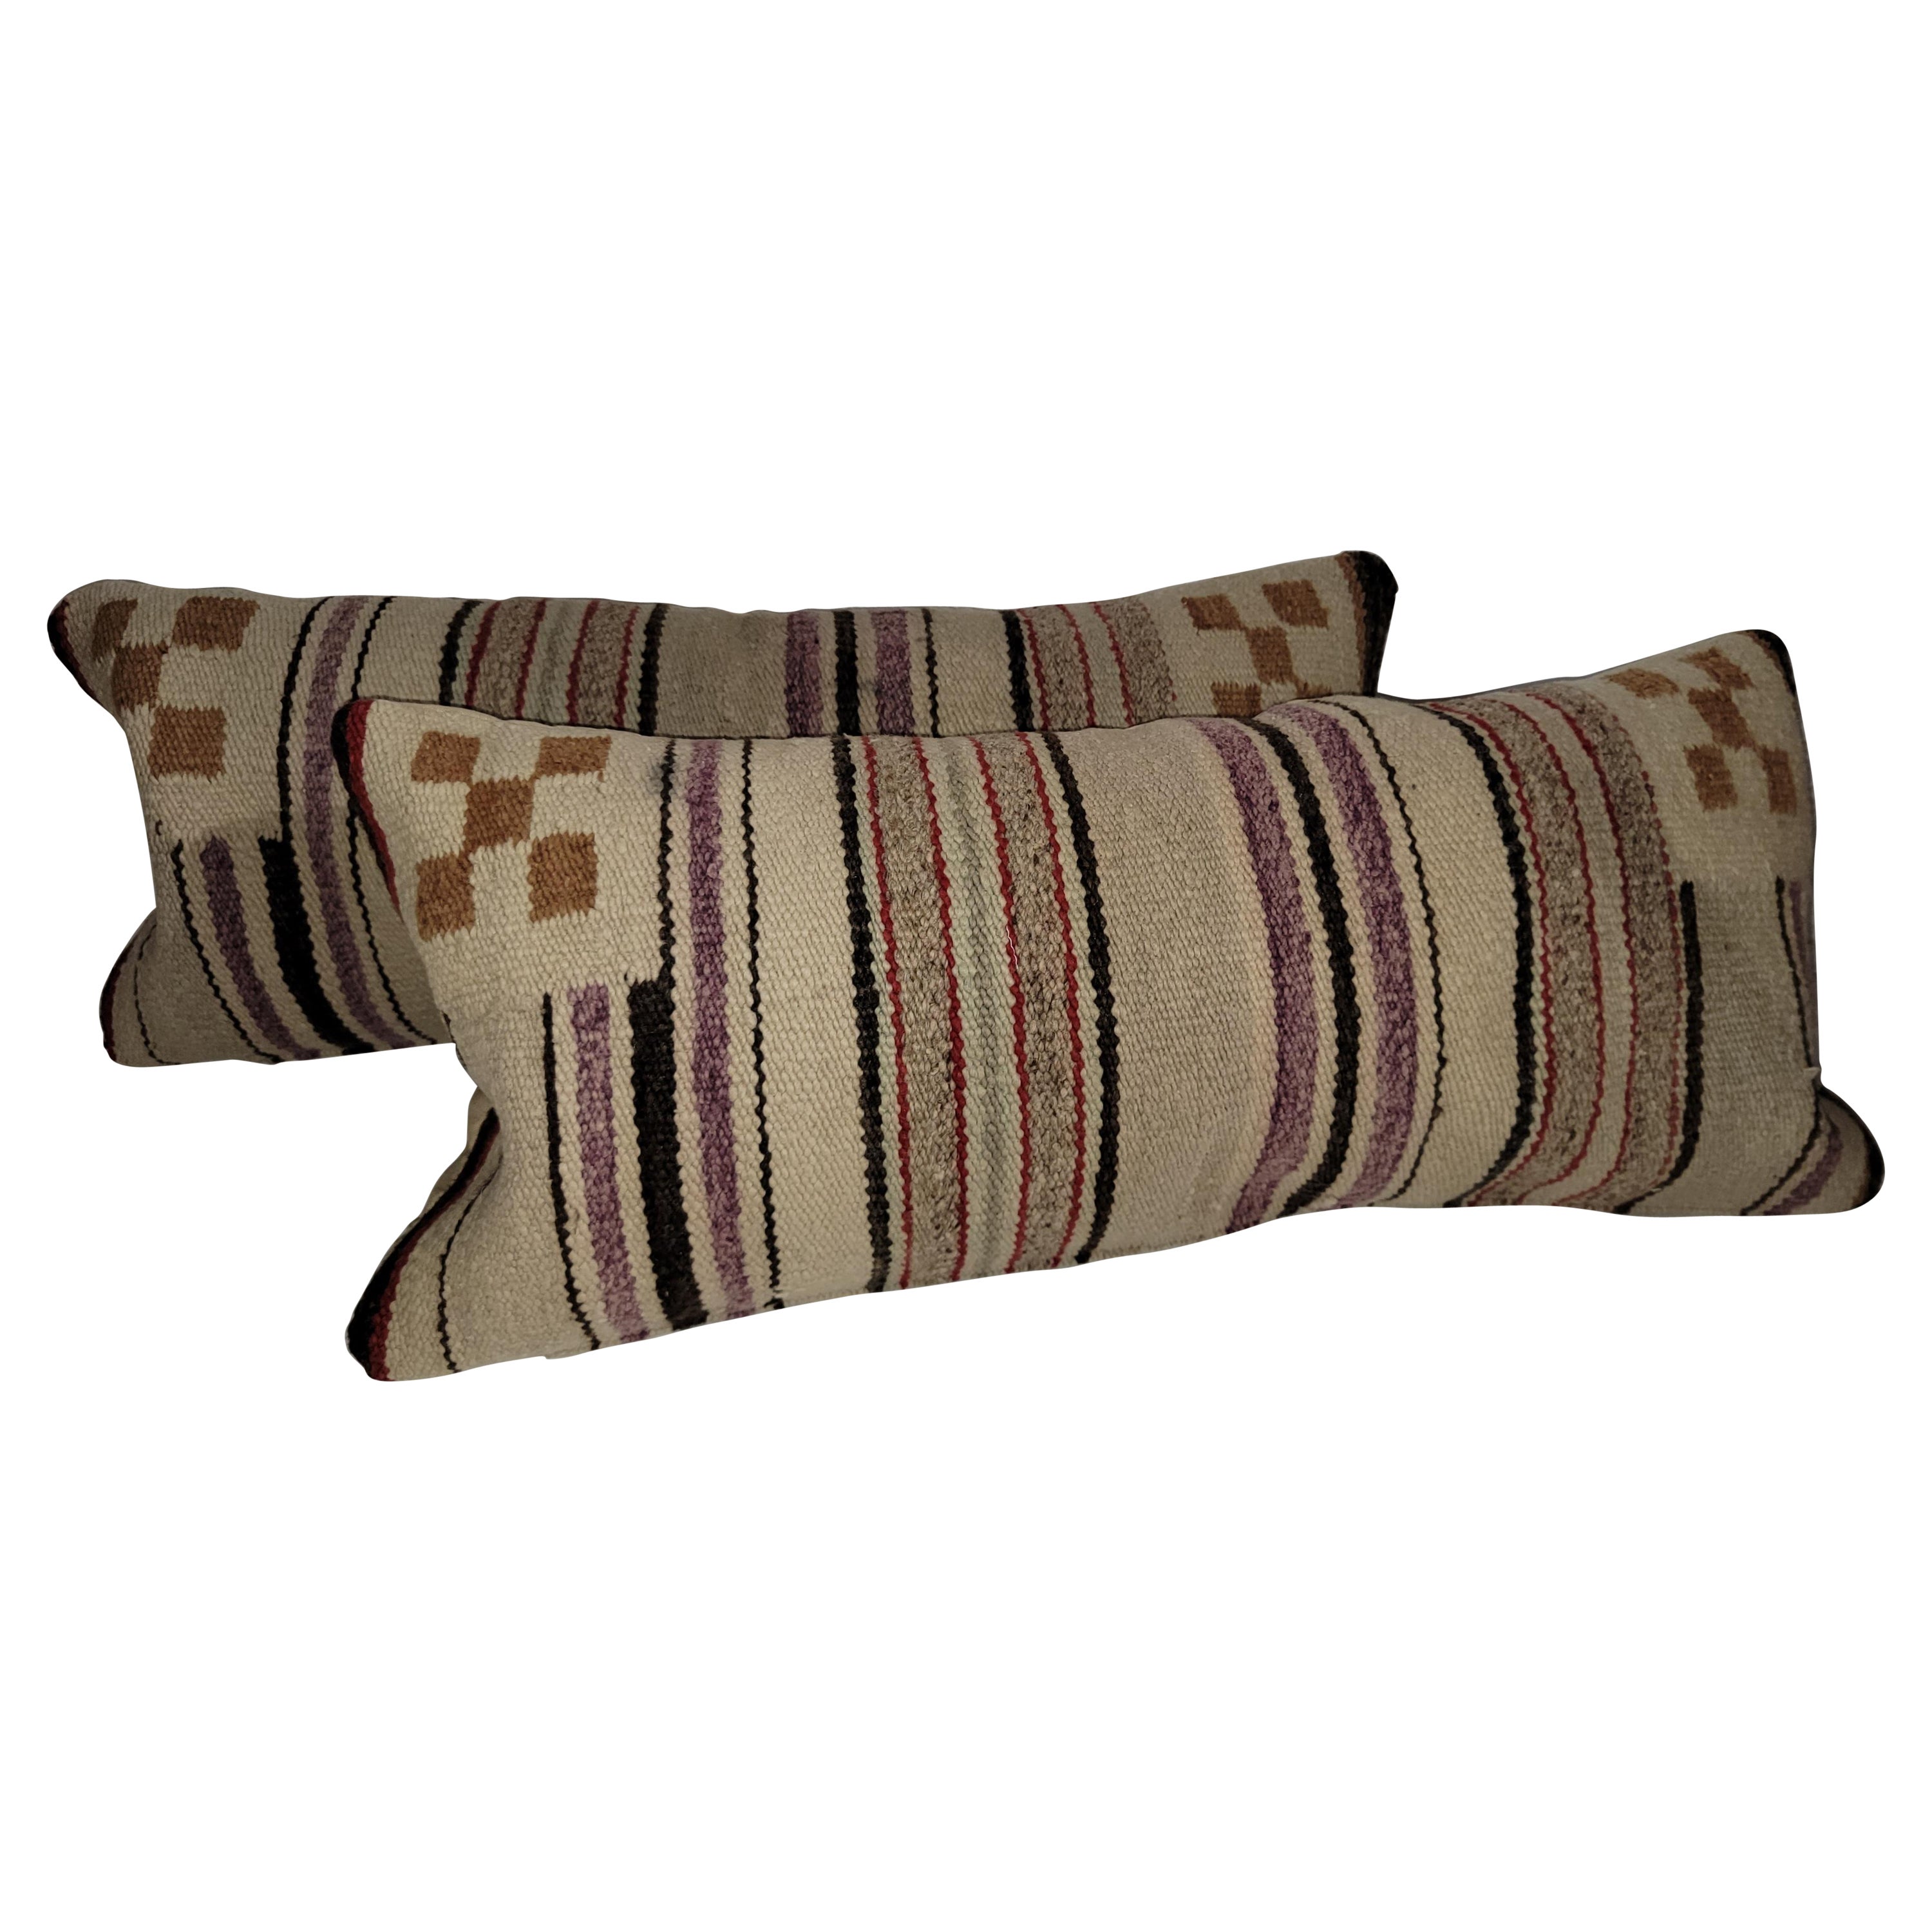 Navajo Indian Weaving Bolster Pillows, Pair For Sale